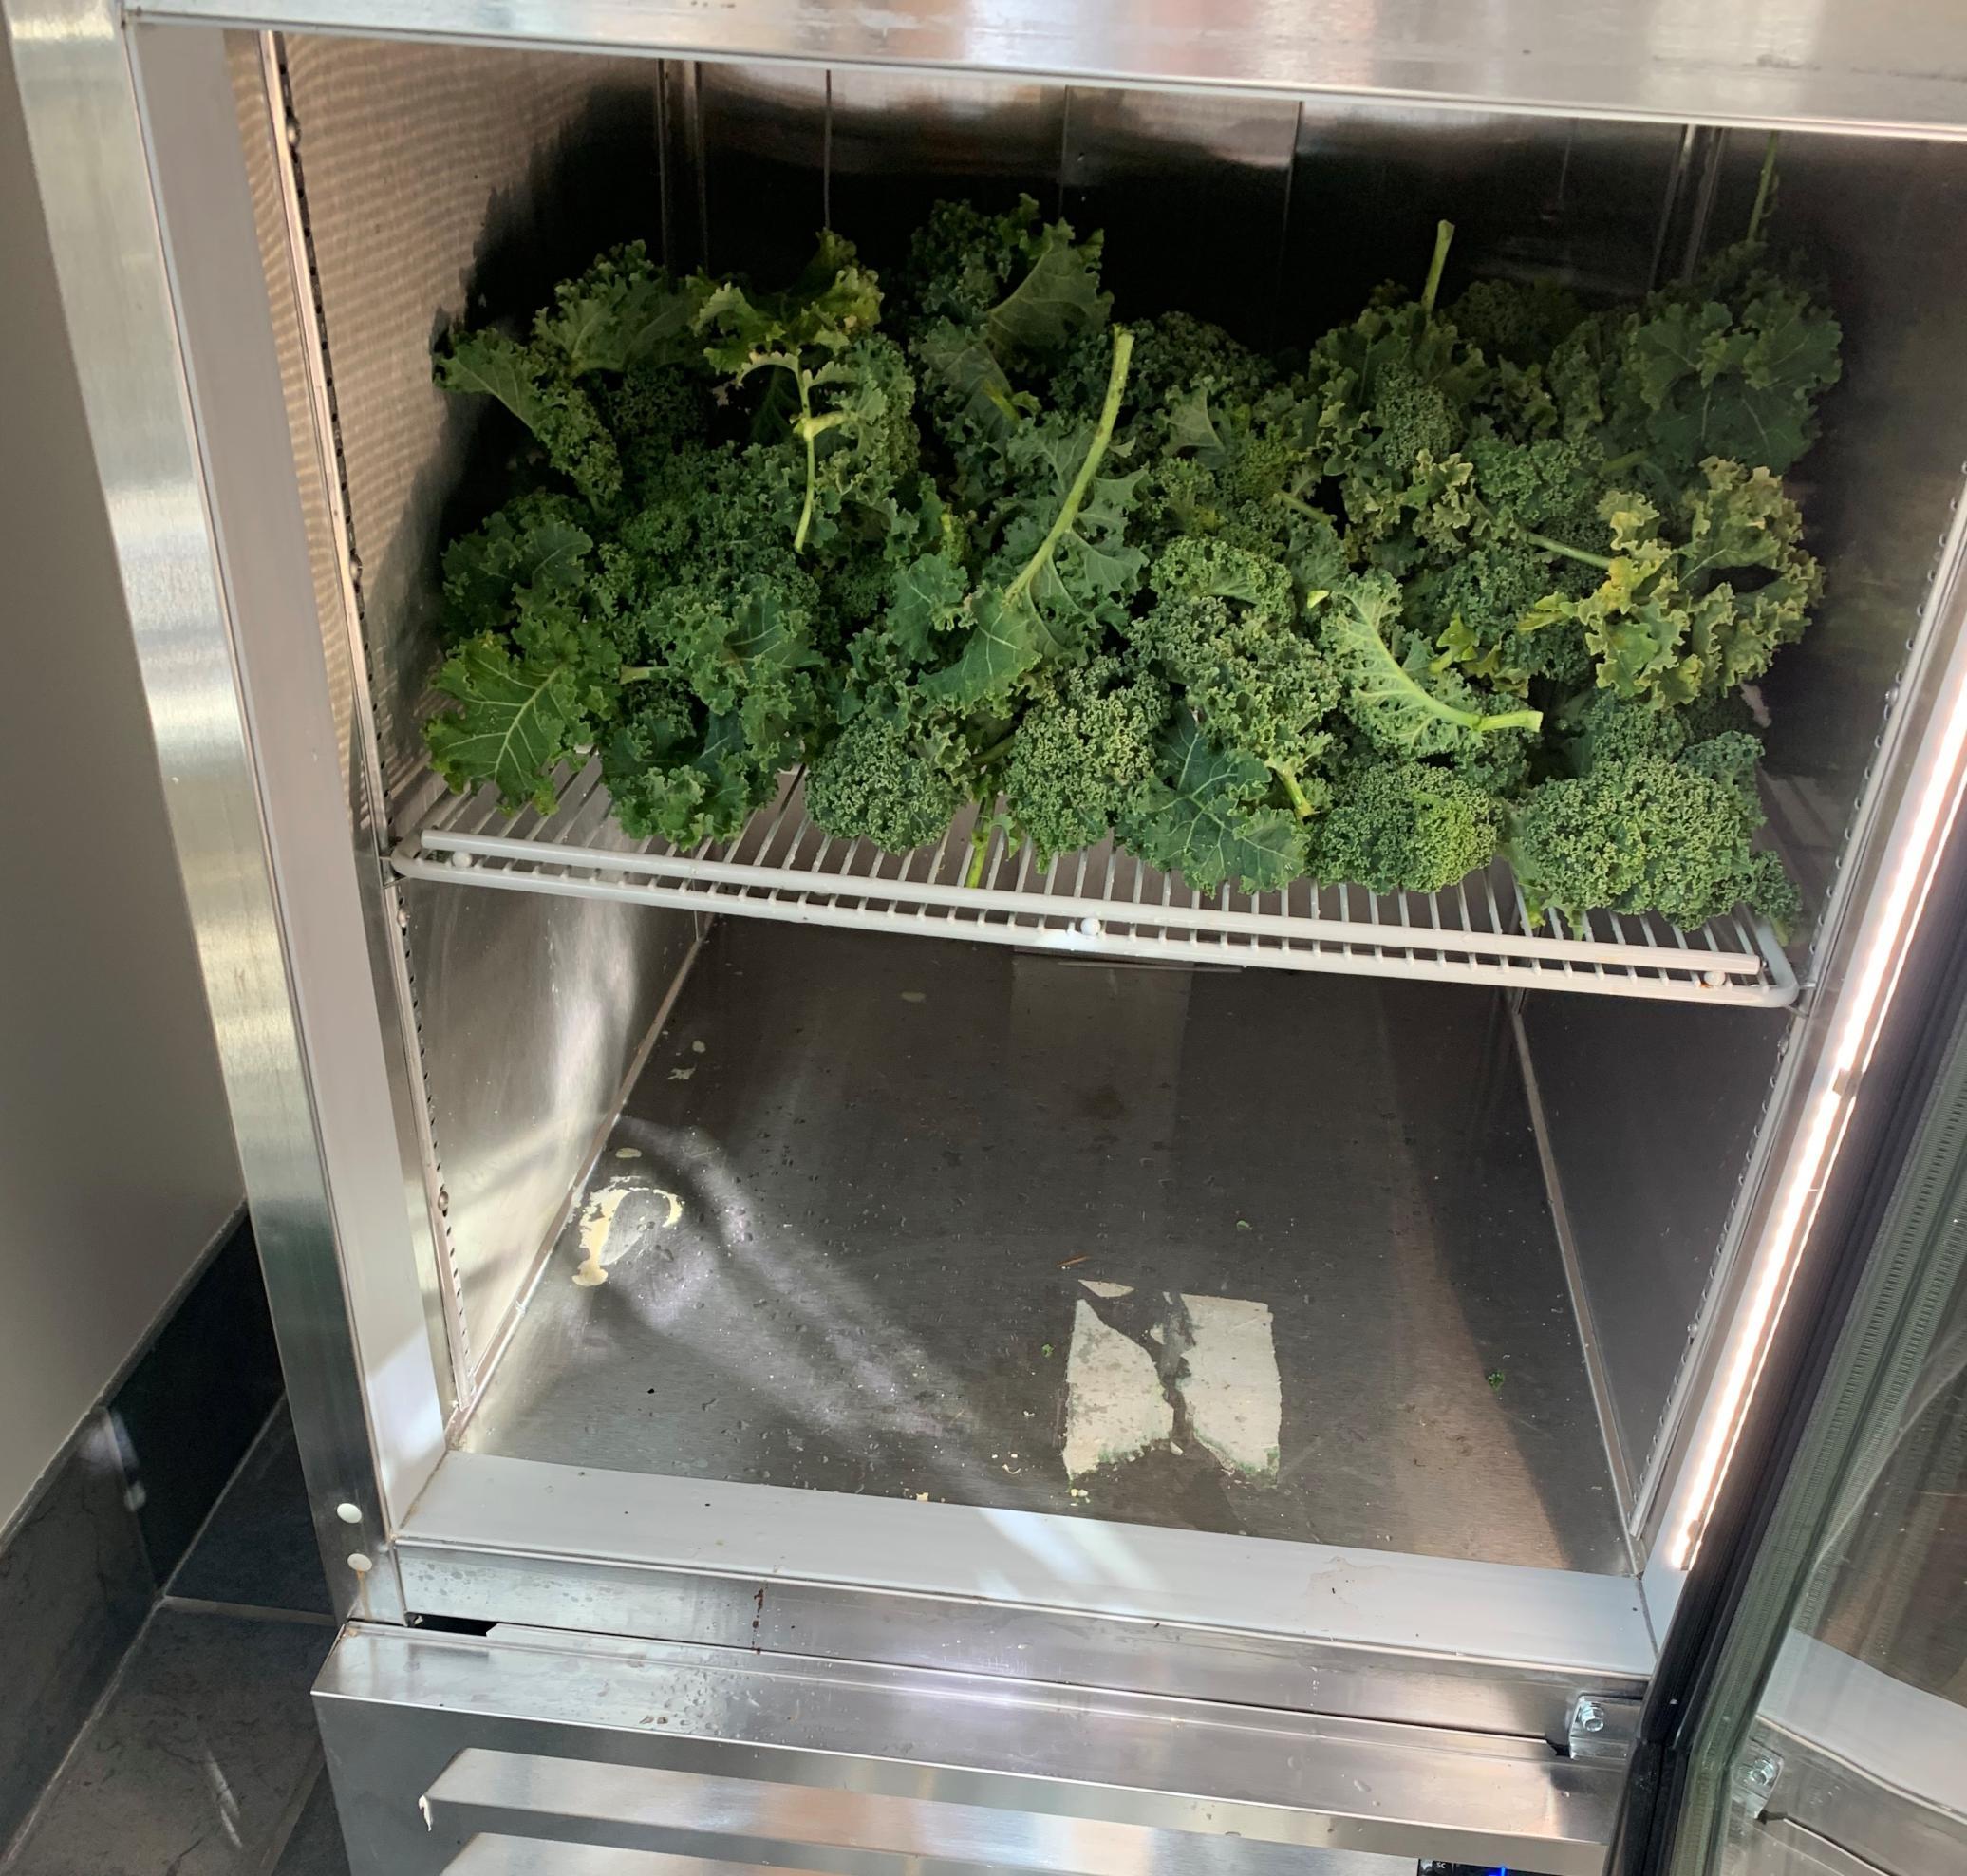 Kale donated to food pantry